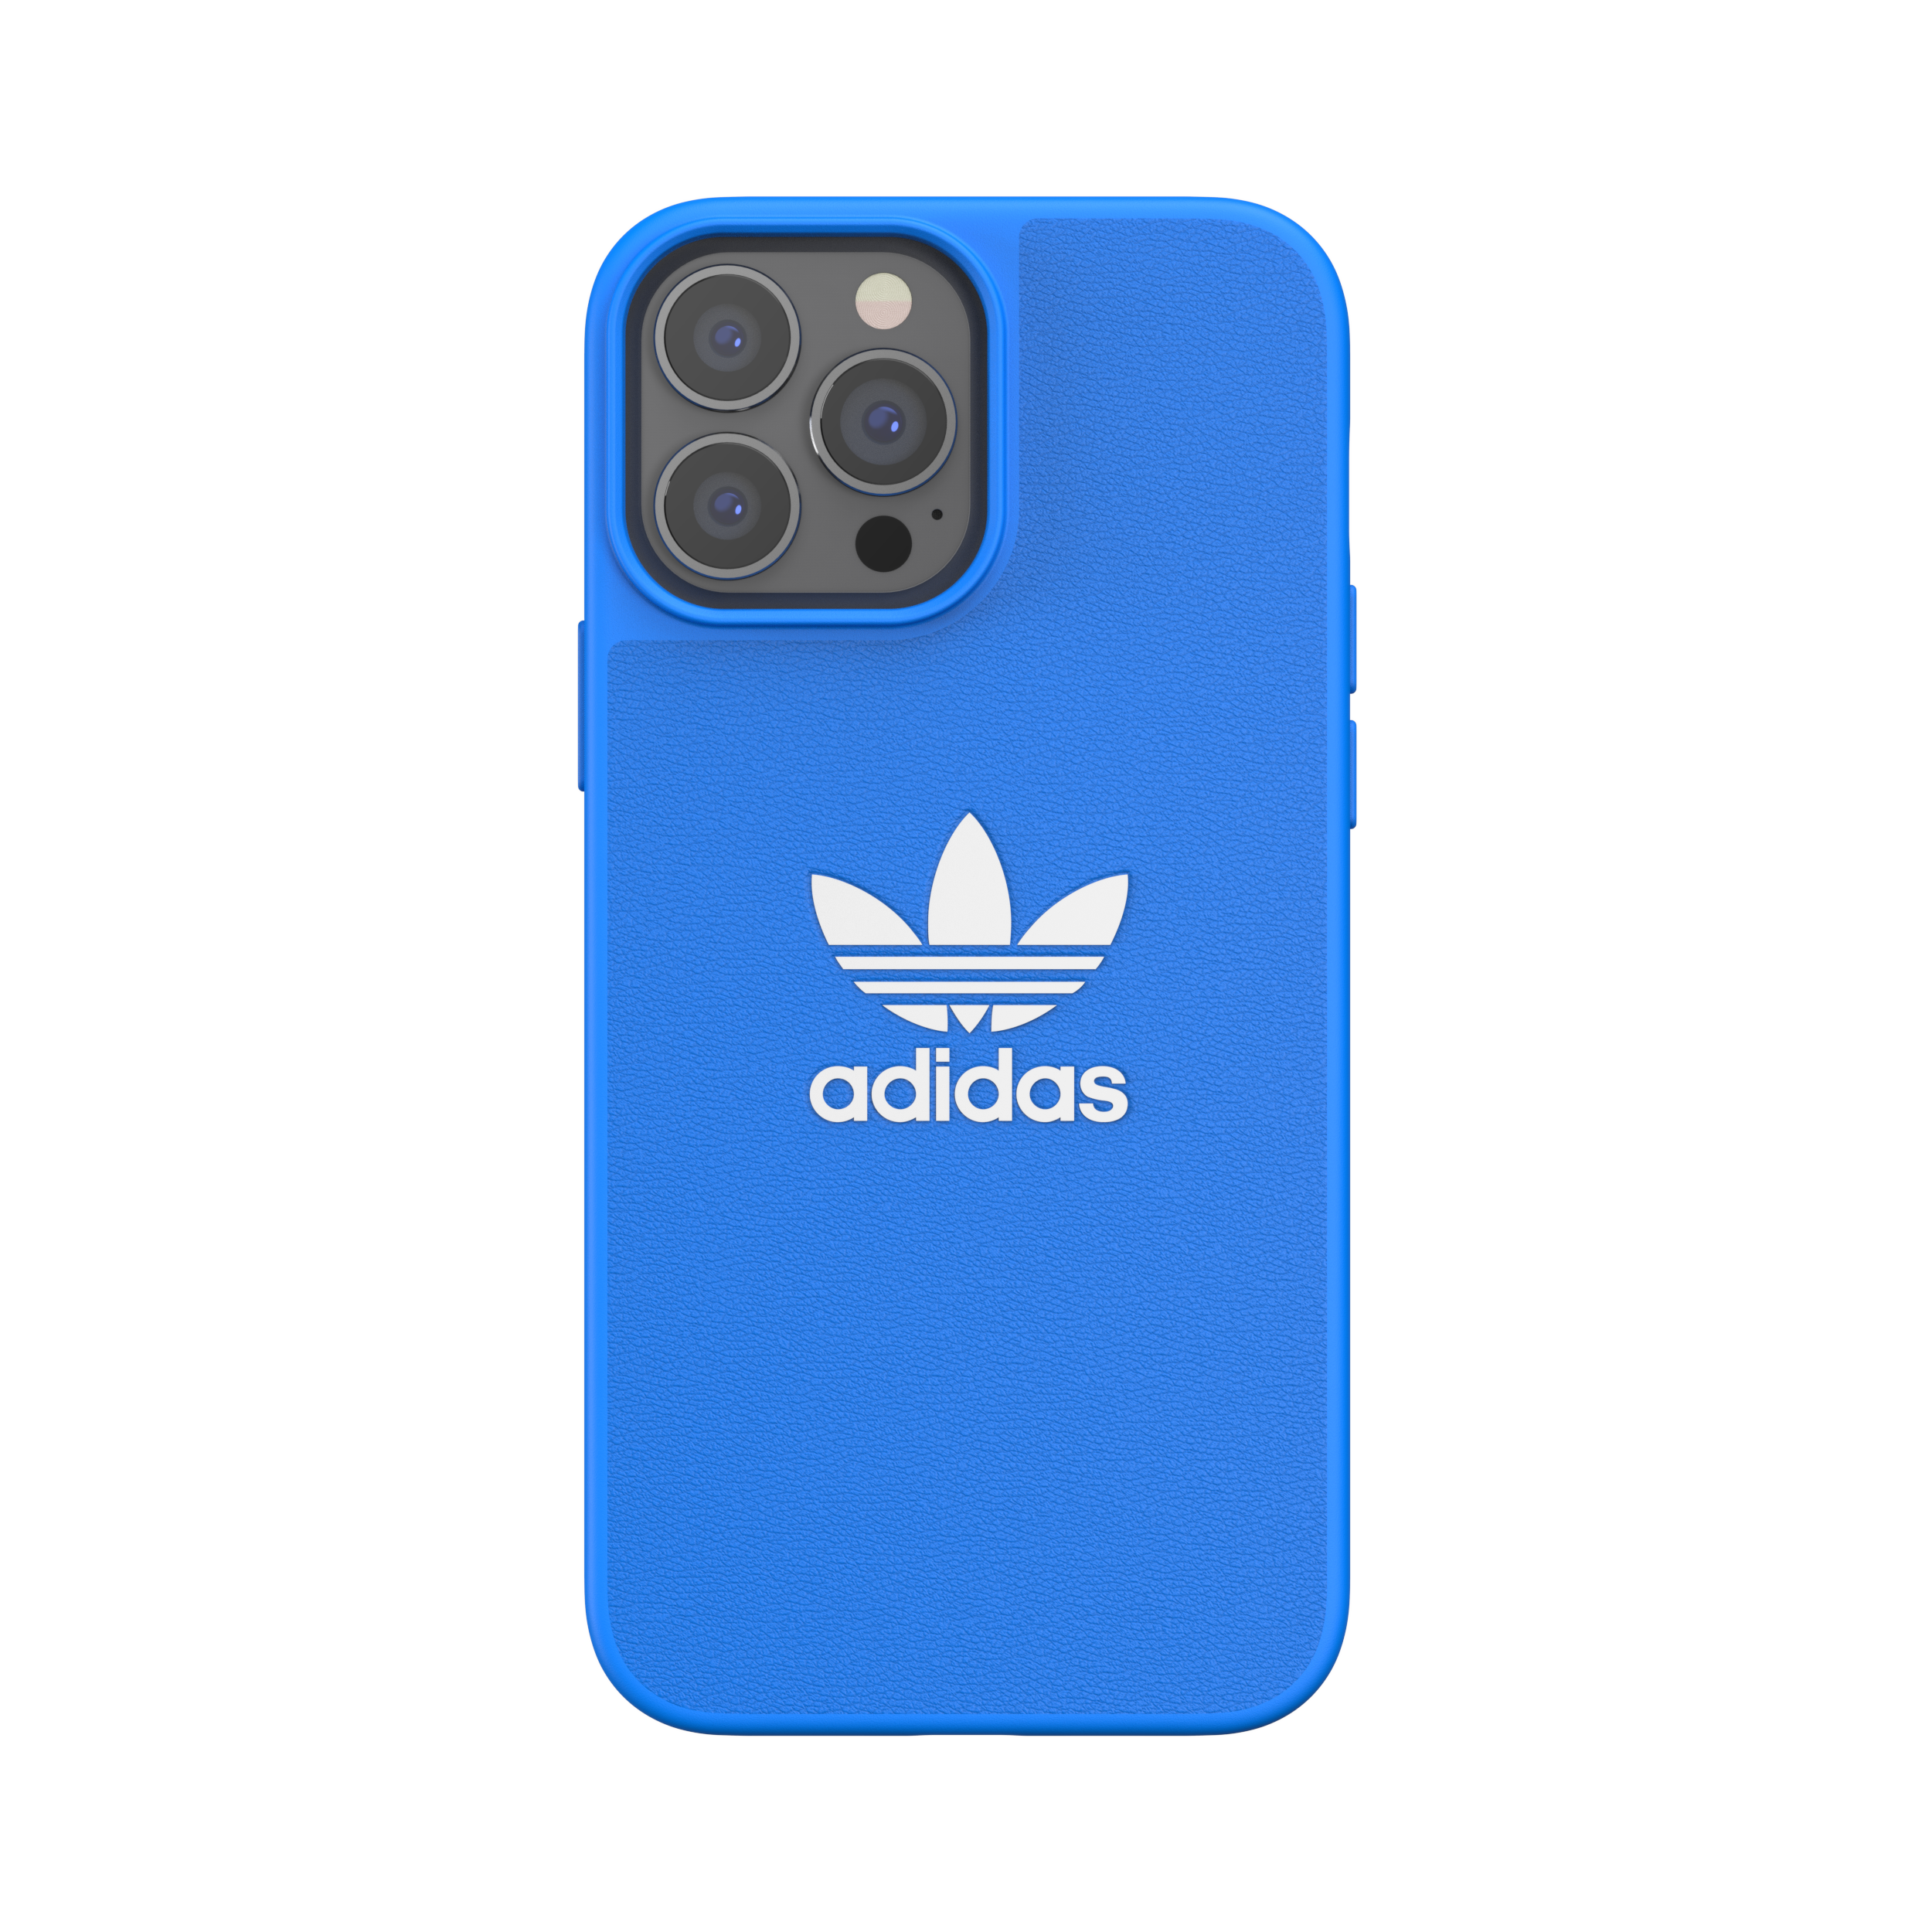 Adidas Originals Iconic Phone Case For iPhone 12/13 Pro Max (Duo Compatiable) - Blue